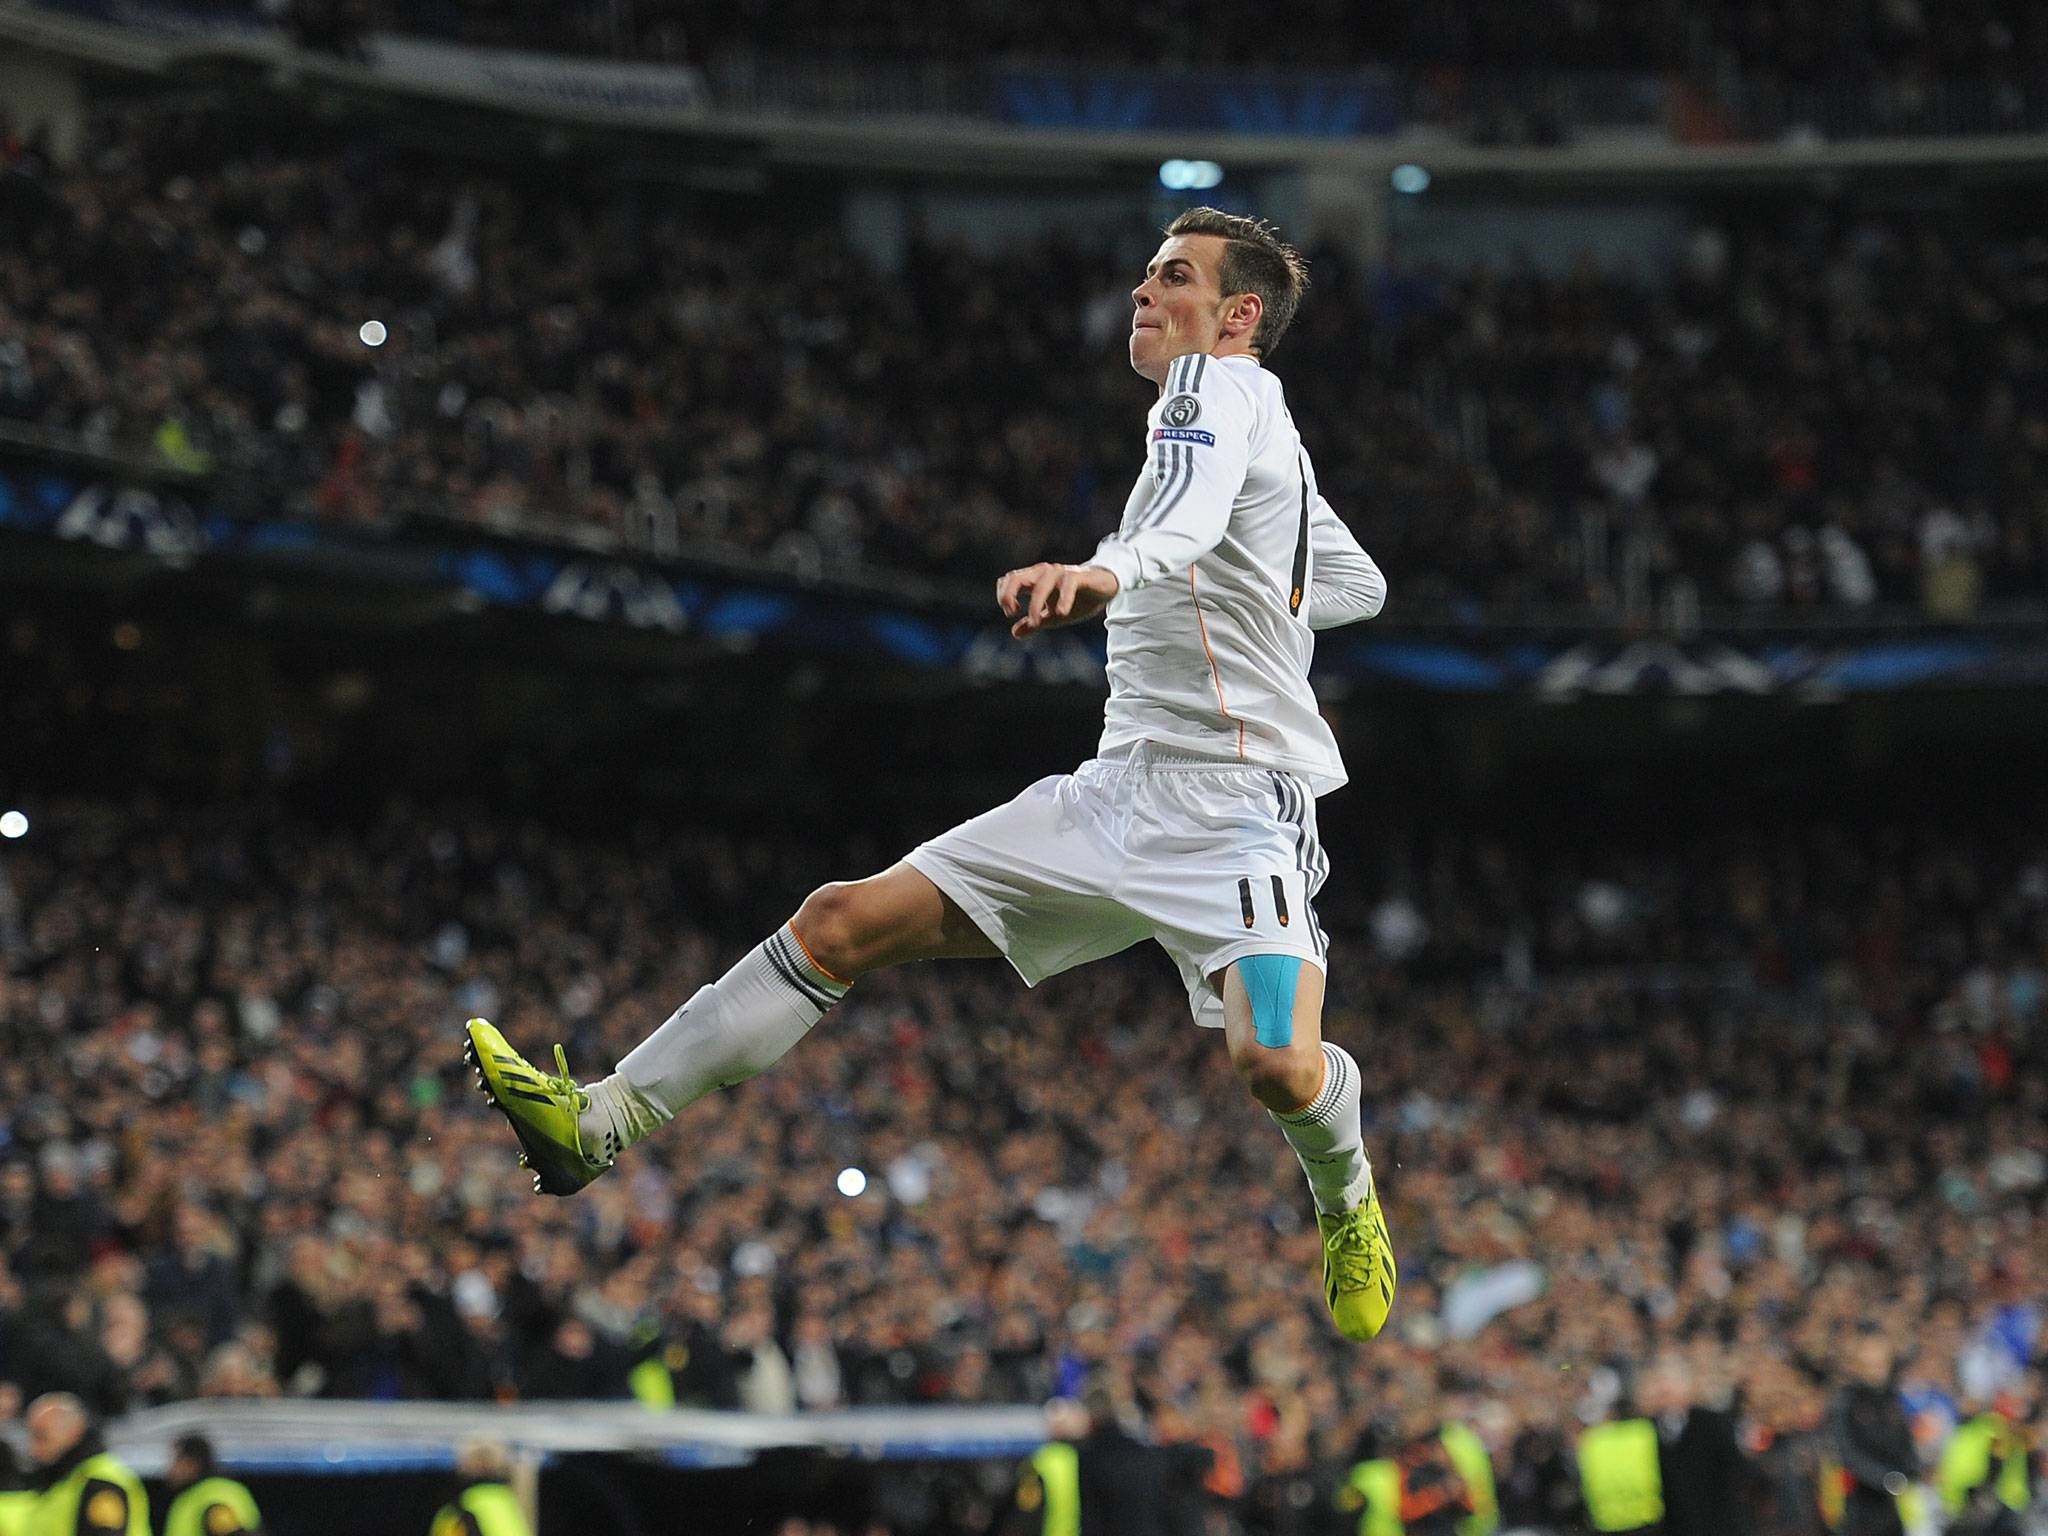 2048x1536 Gareth Bale Wallpapers Images Photos Pictures Backgrounds | HD Wallpapers |  Pinterest | Gareth bale, Hd wallpaper and Wallpaper